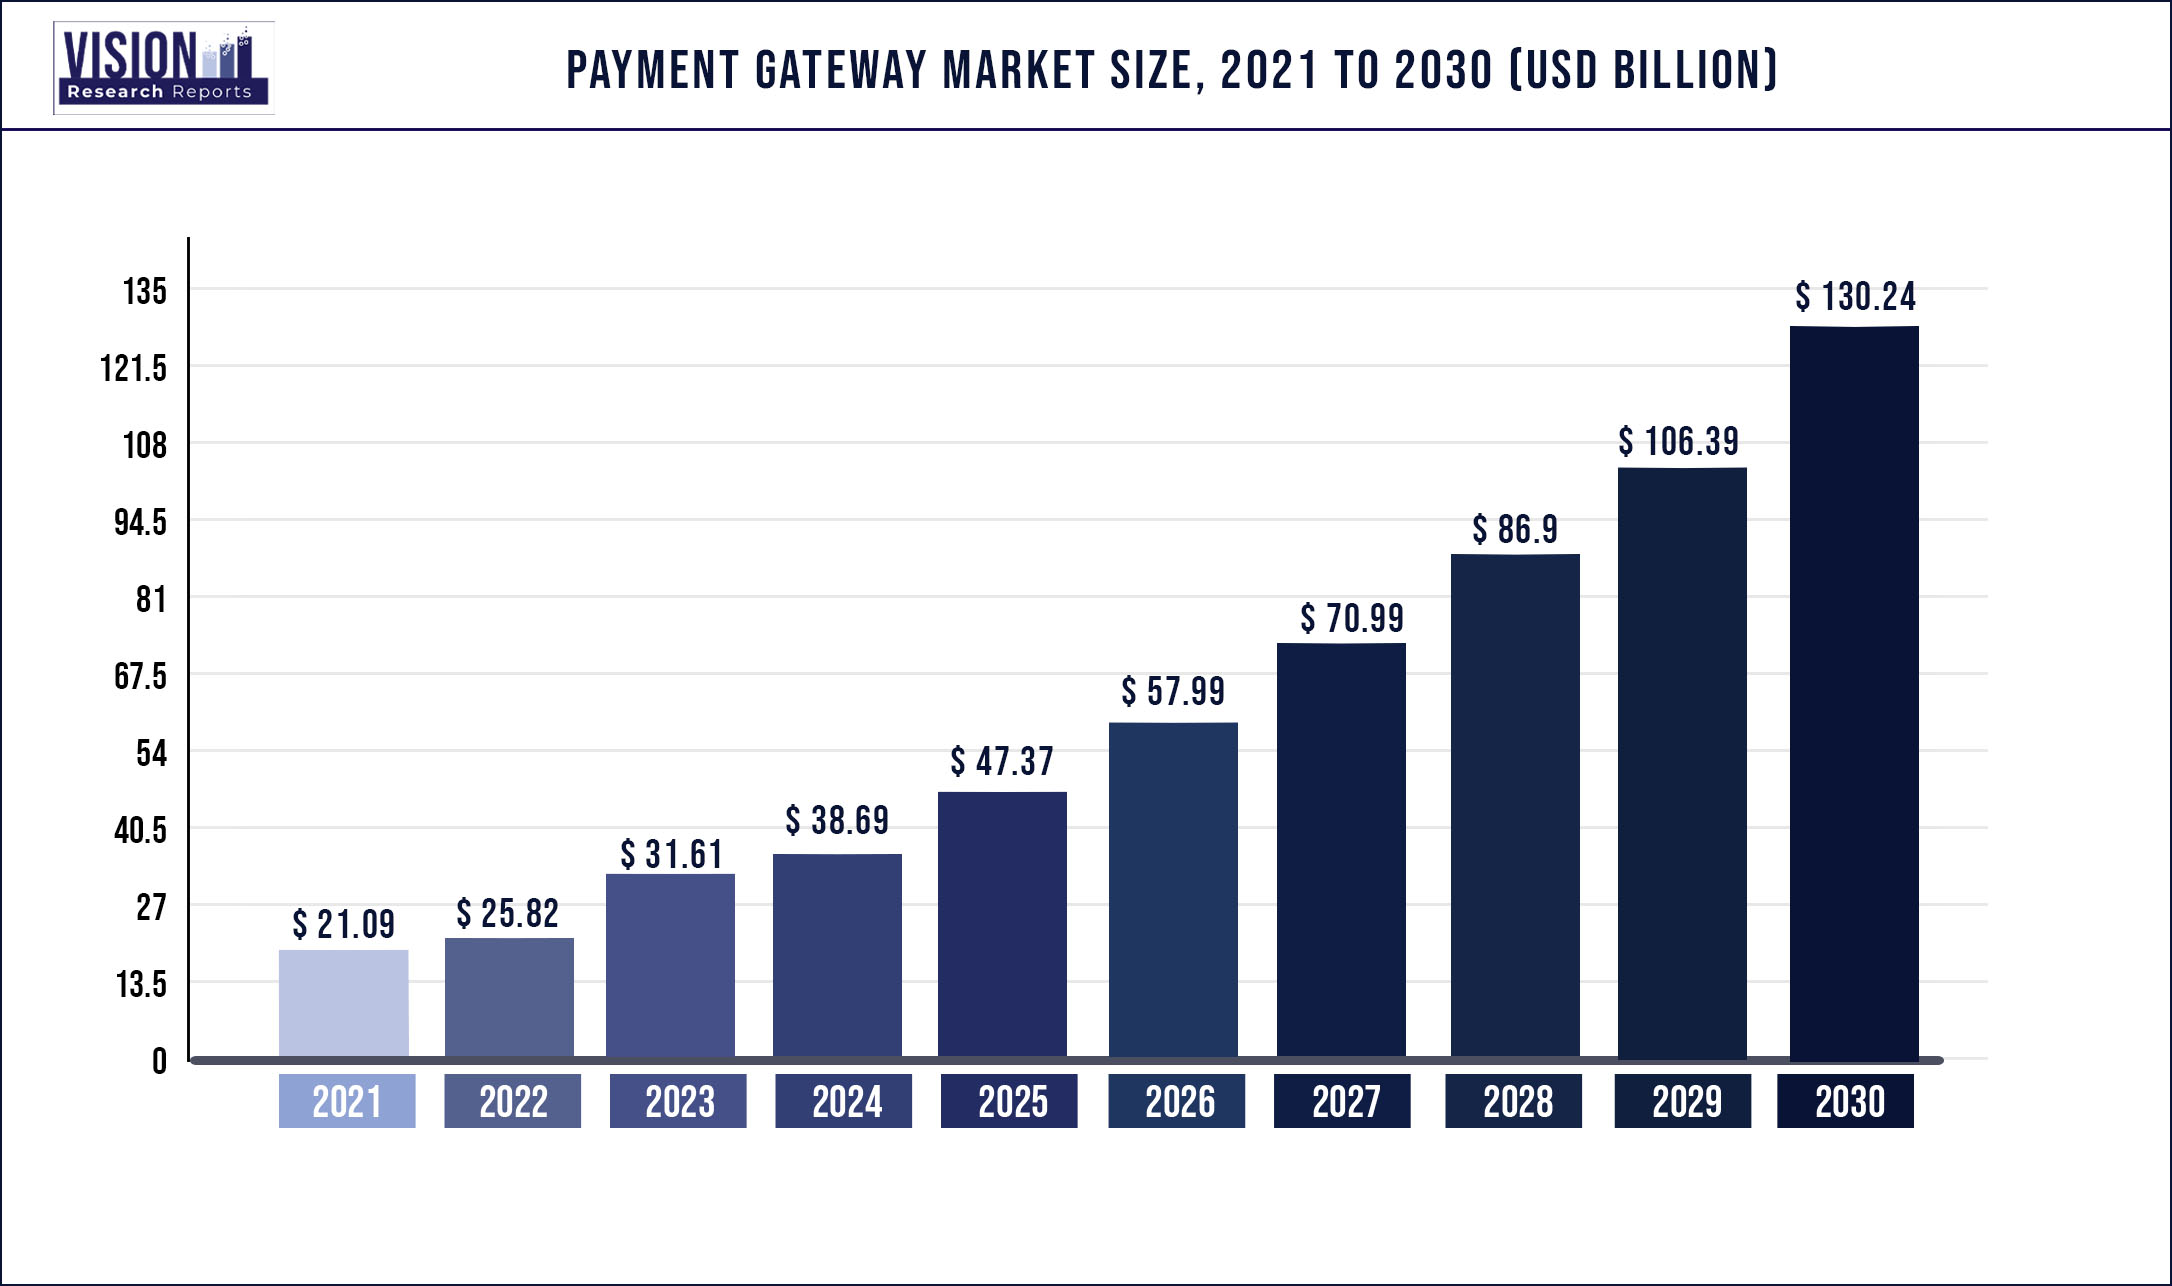 Payment Gateway Market Size 2021 to 2030